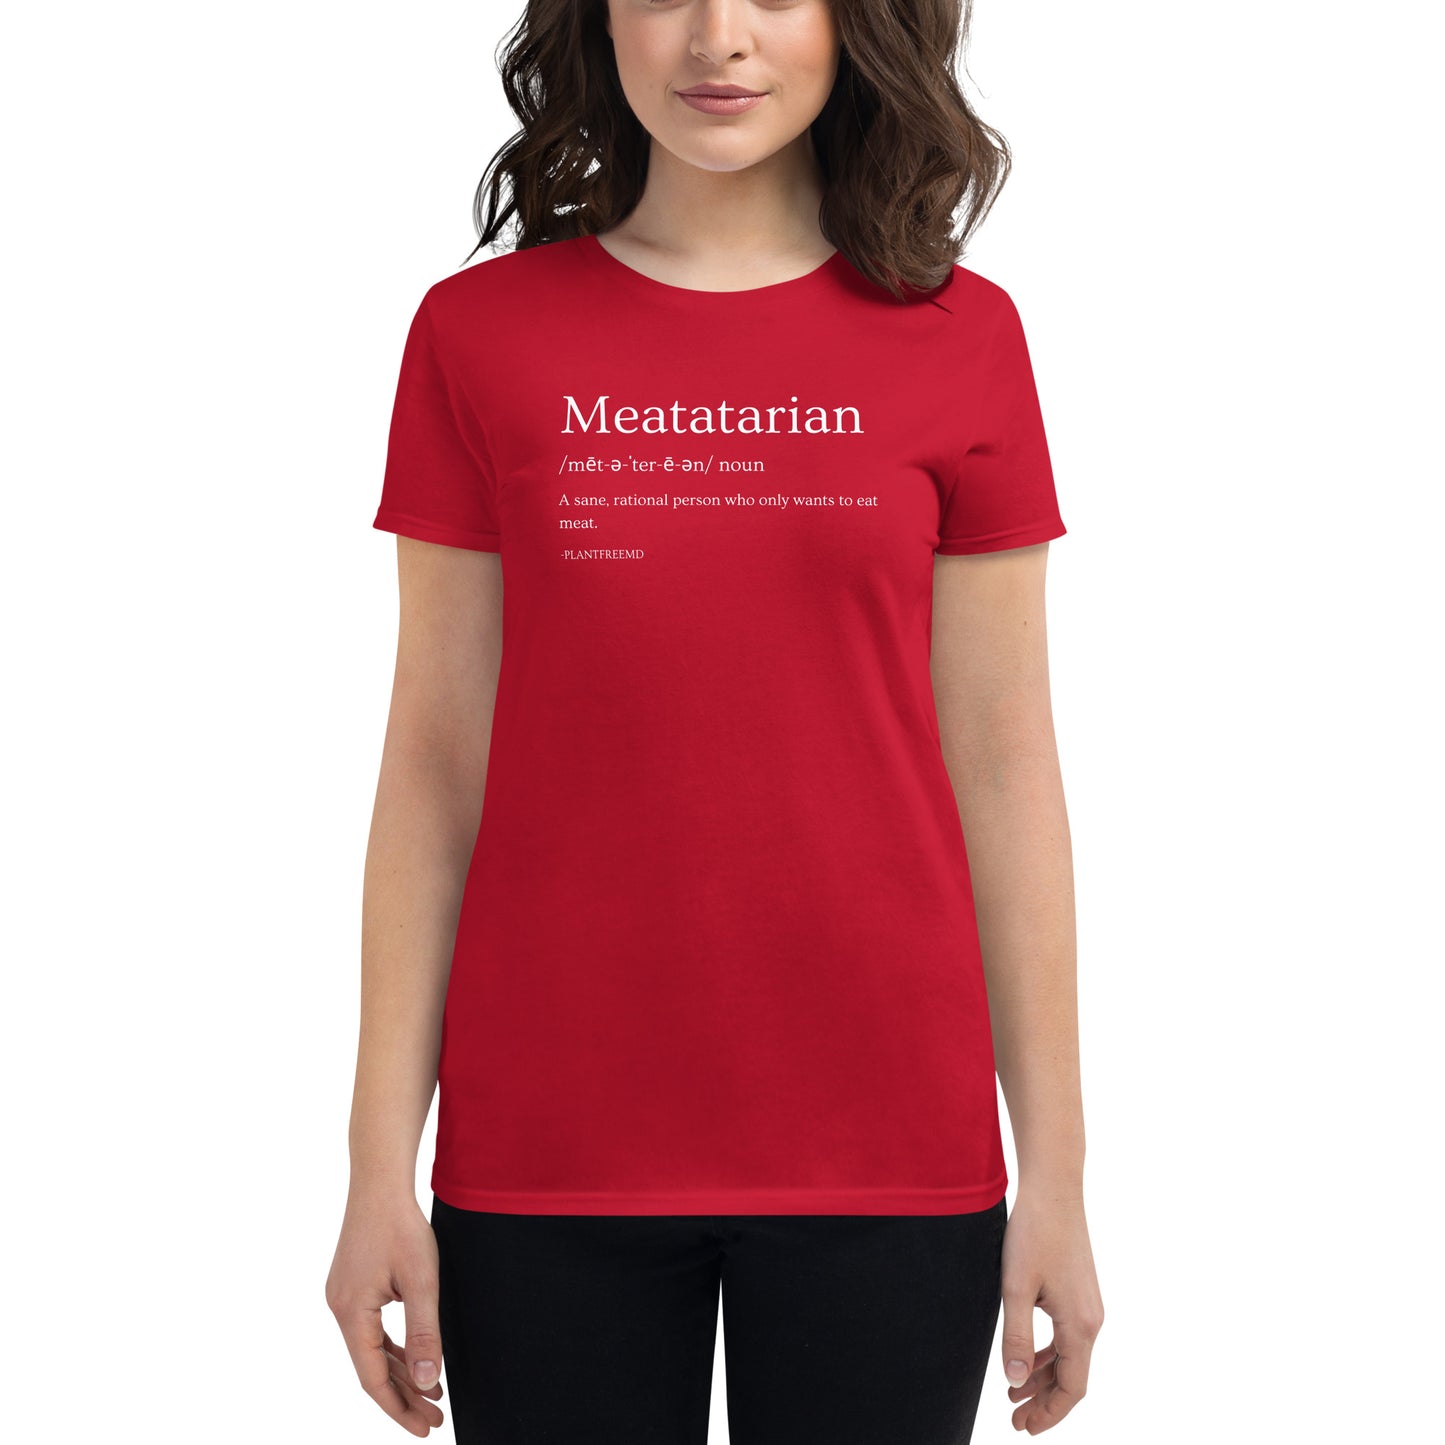 Meatatarian Women's Fitted T-shirt